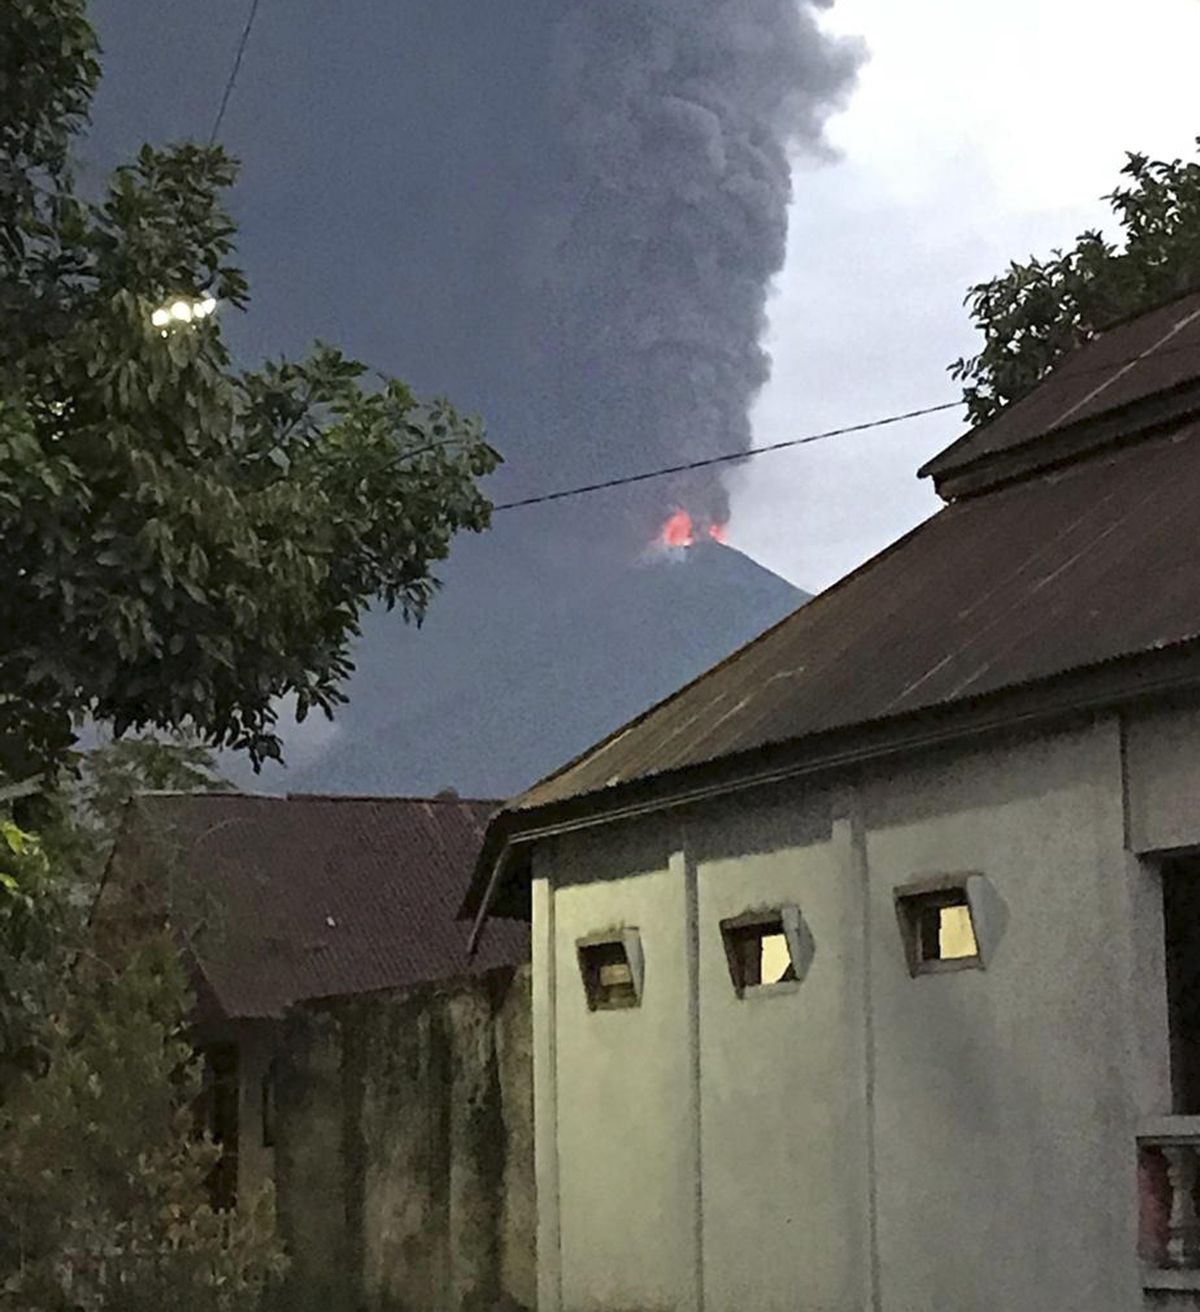 Plumes of volcanic ash rise out of Mount Soputan, on Wednesday, Oct. 3, 2018, from the village of Tombatu, North Sulawesi, Indonesia. No evacuations were immediately ordered, though people were advised to avoid the area nearest the mountain and to beware of falling ash. (Yehezkiel Dondokambey / AP)